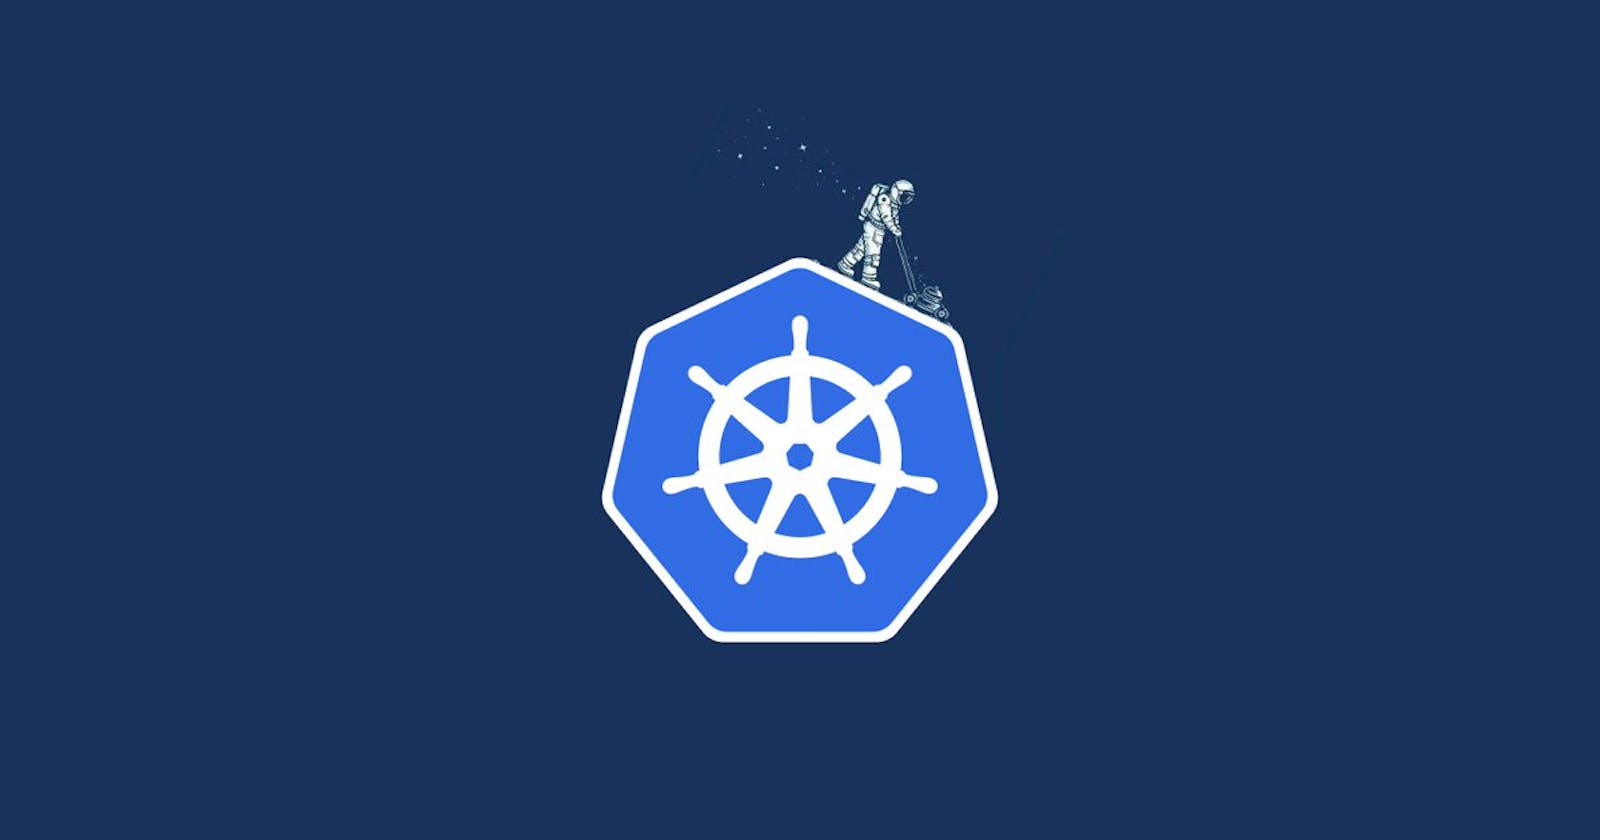 Building a Simple Web Application with Kubernetes.